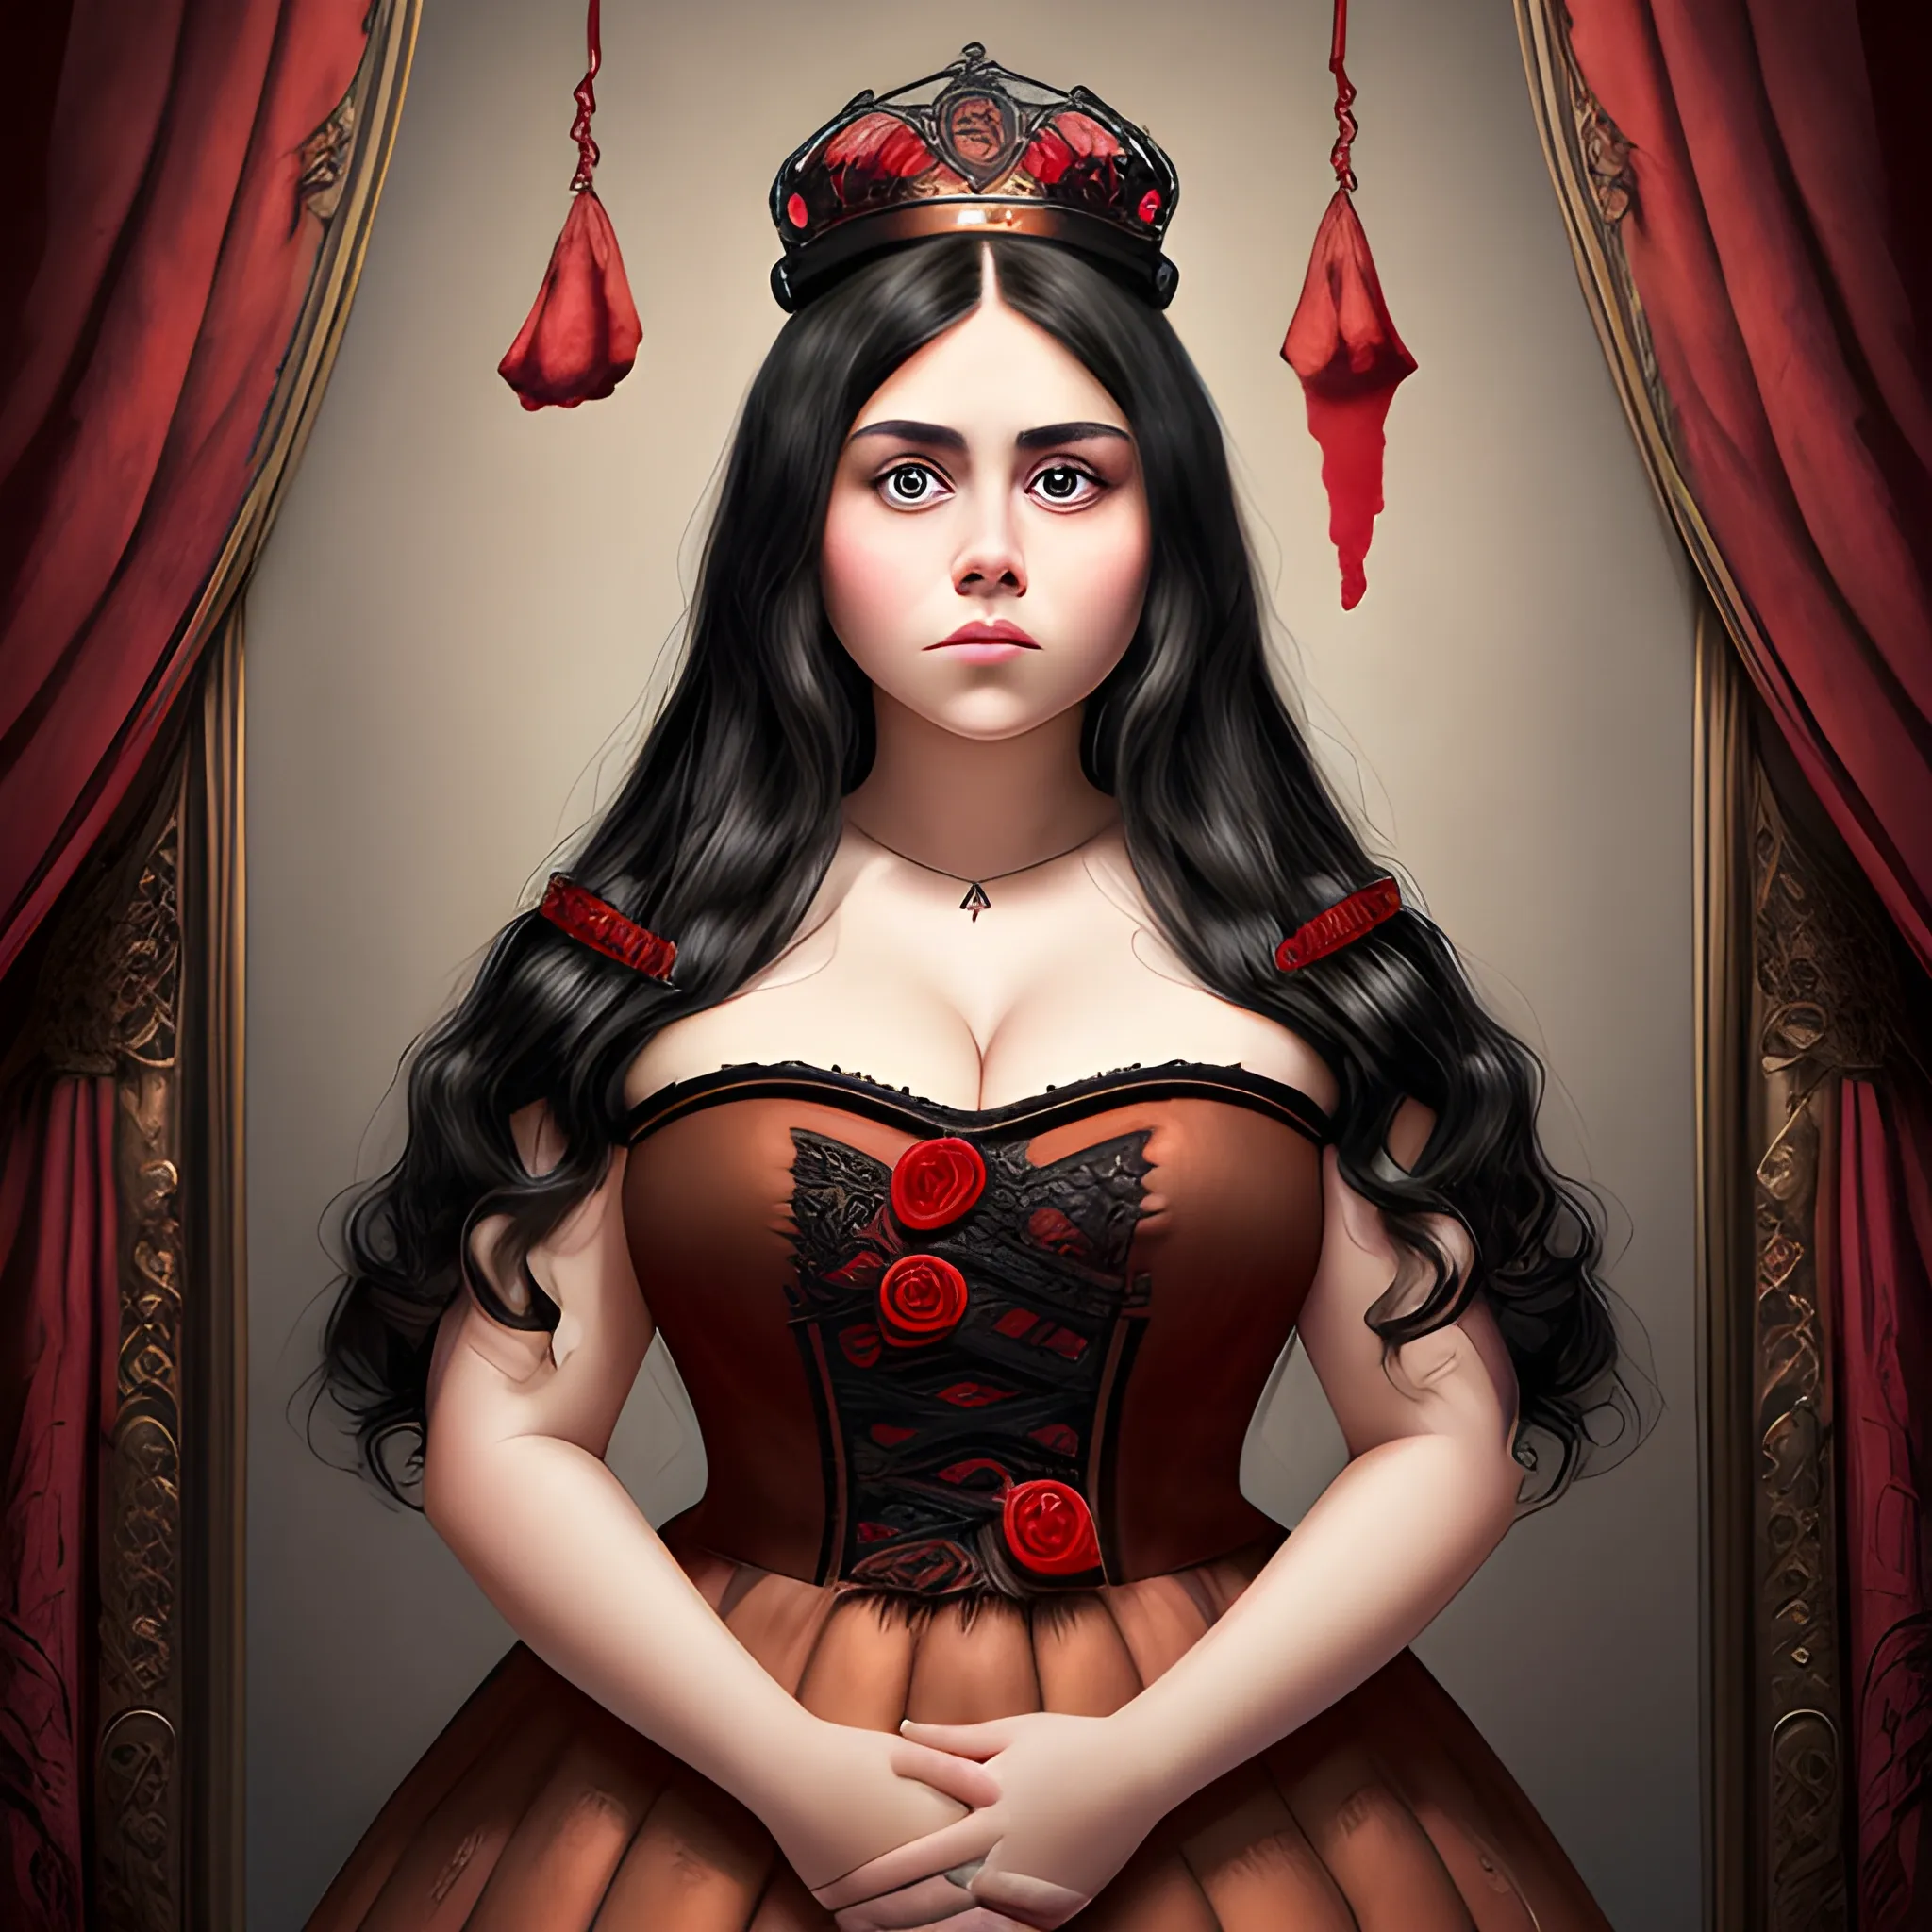 (((high detail))), best quality, Warm Colors, (detailed), (high resolution)Black long-haired female adult, full body, curvy face, with rosy cheeks, big black eyes, thick eyelashes, thick peach lips, thick eyebrows,  with a black and red dress holding a bloody crown in her hand, with blood in her dress roses of backround , wallper , Oil Painting,  